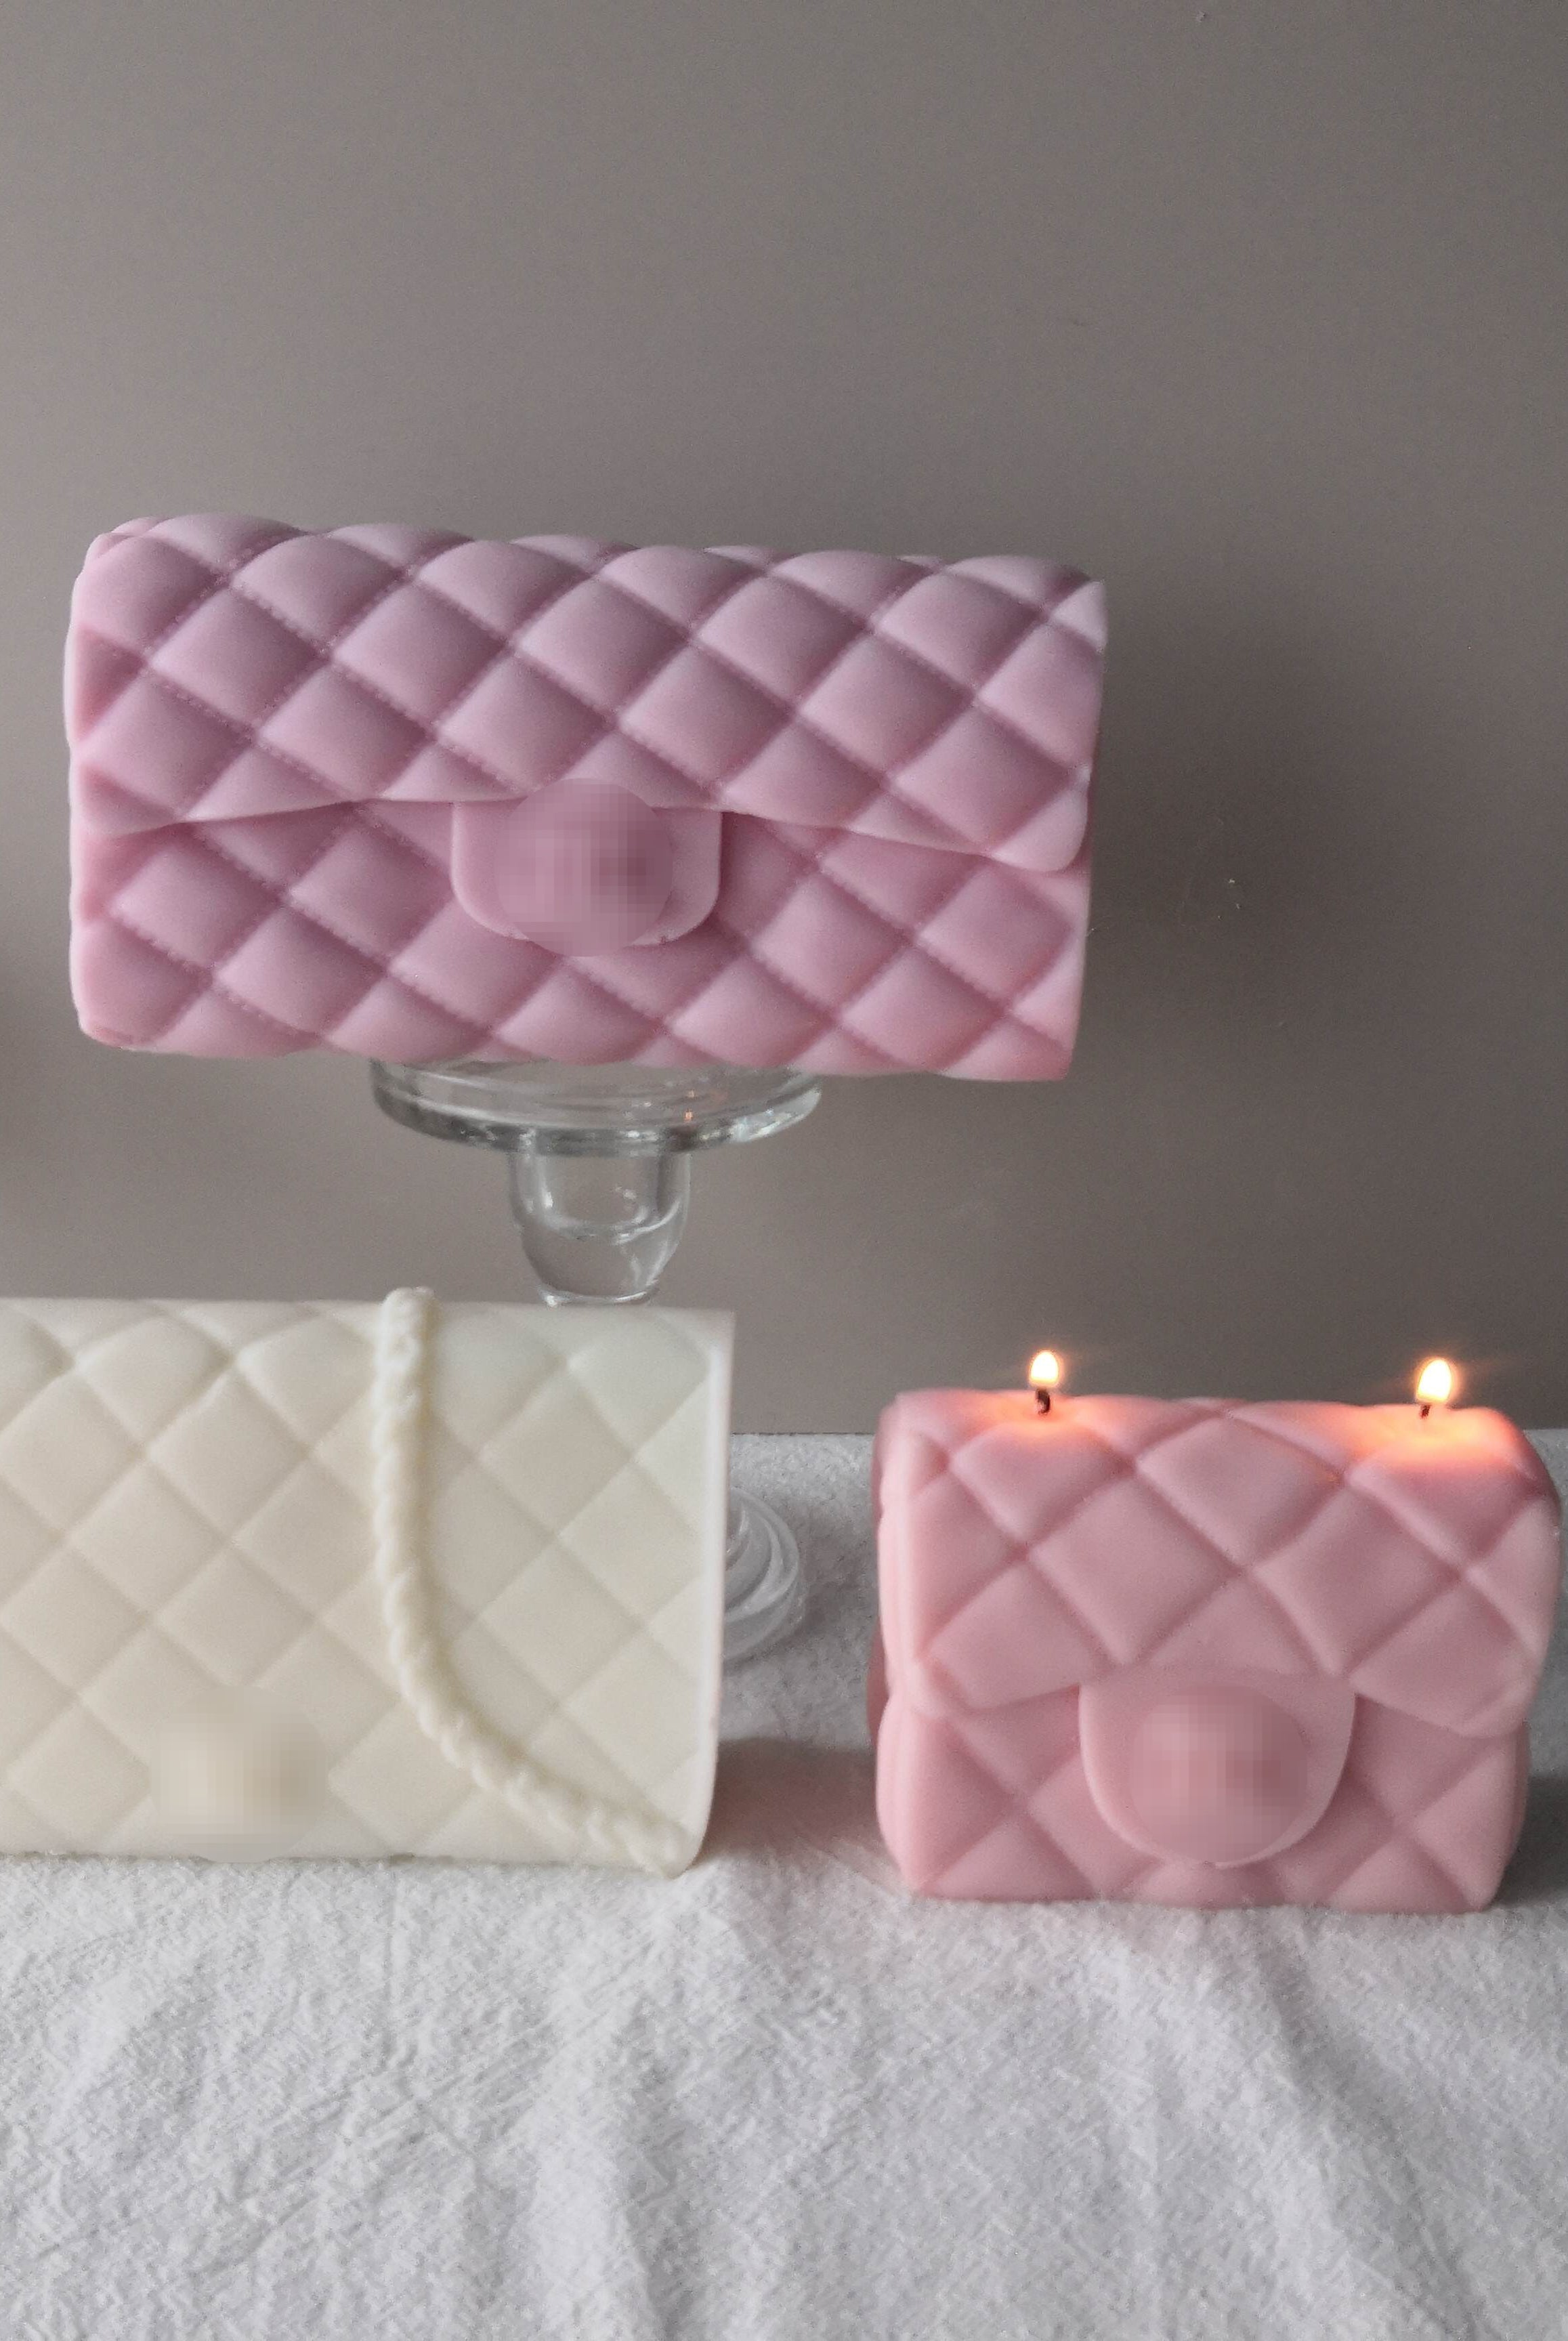 Designer Handbag Large 9 1 - Silicone Mould, Mold for DIY Candles. Created using candle making kit with cotton candle wicks and candle colour chips. Using soy wax for pillar candles. Sold by Myka Candles Moulds Australia